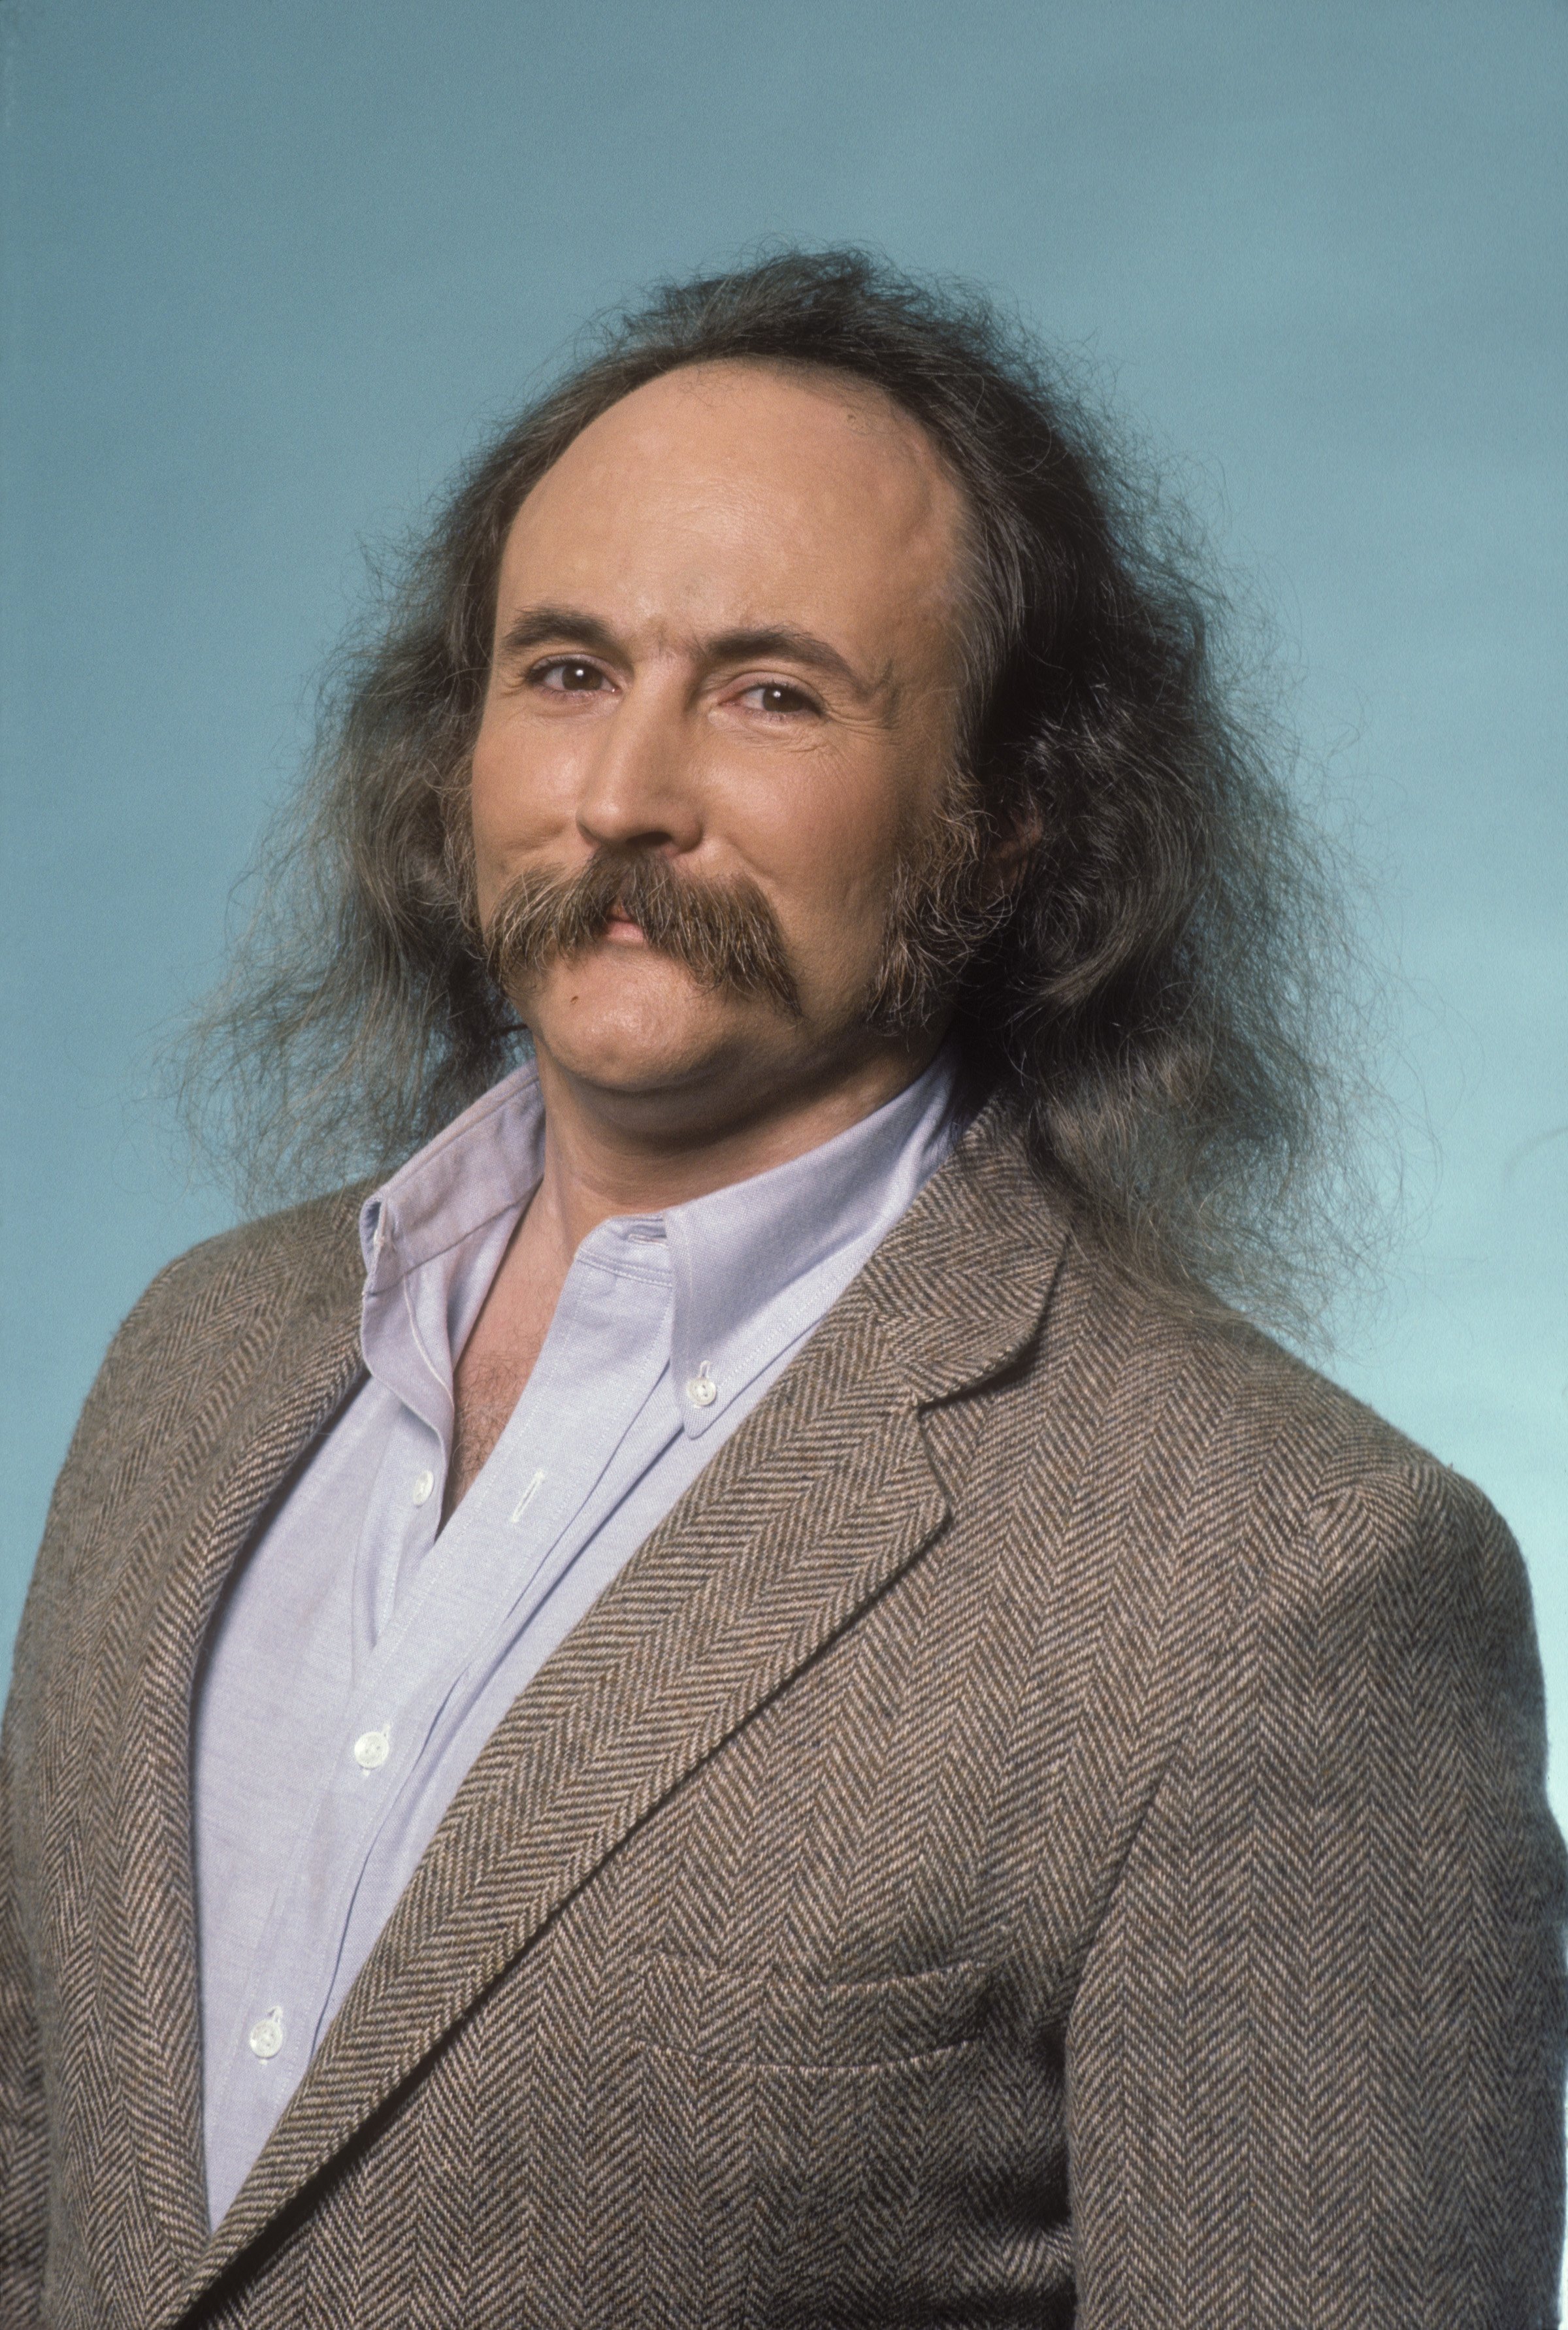 David Crosby photographed in New York City on August 3,1984. | Source: Getty Images